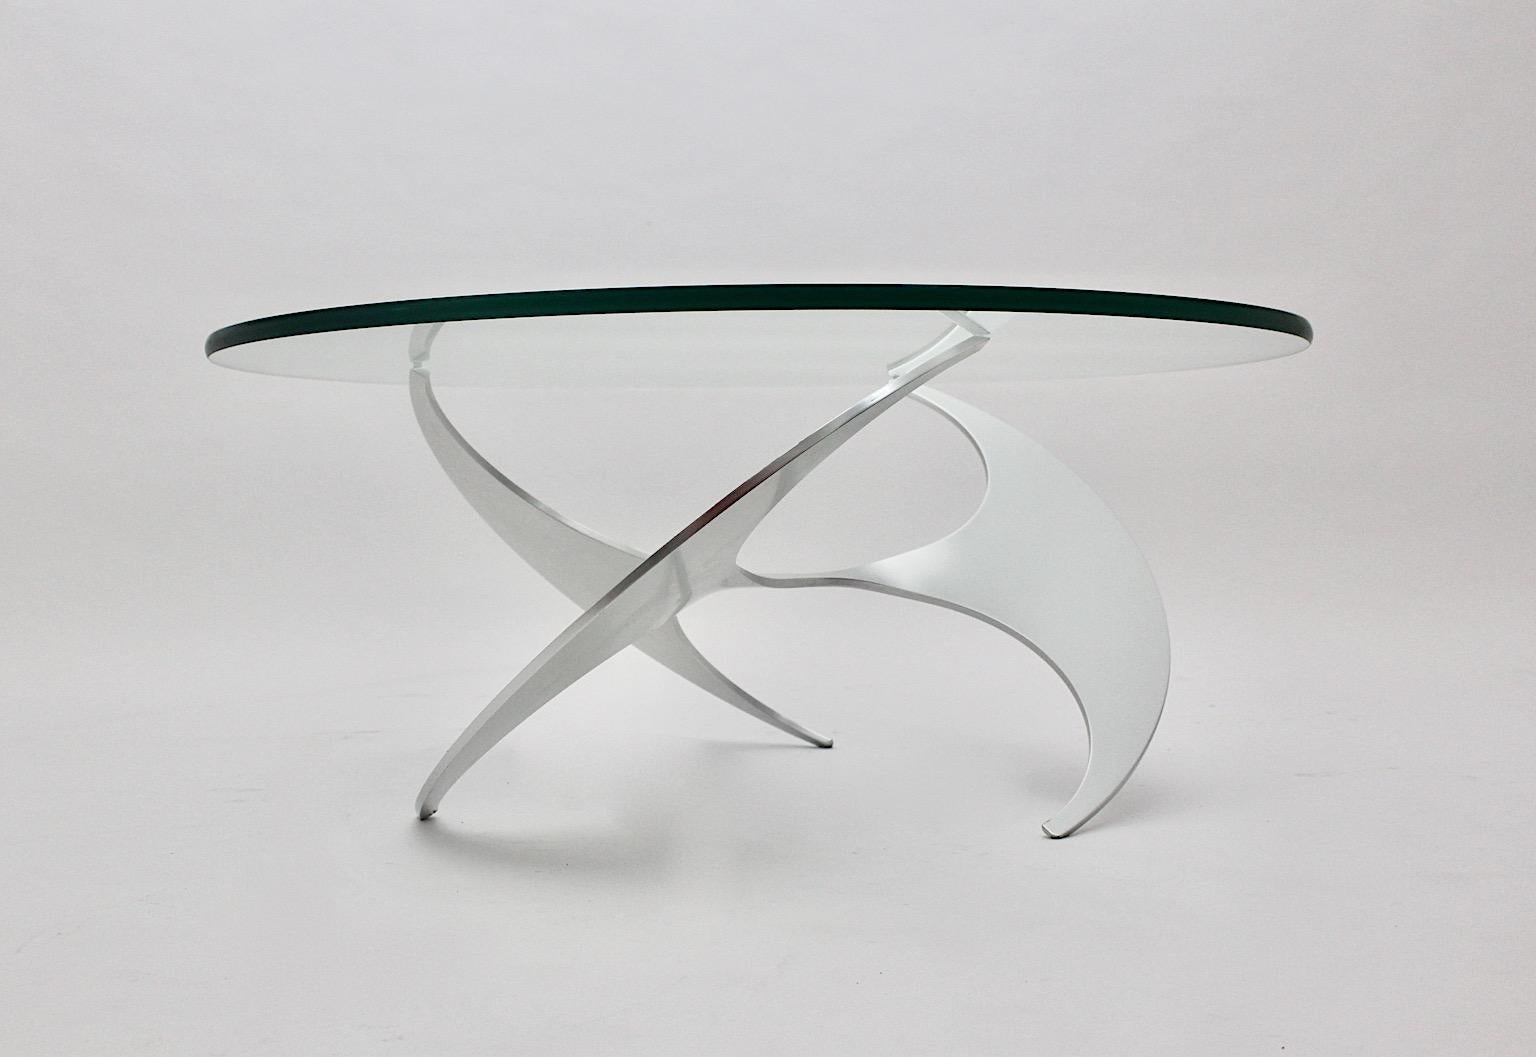 A Space Age vintage silver aluminum glass coffee table or sofa table, which was designed by Knut Hesterberg for Ronald Schmitt, circa 1964, Germany.
While the polished aluminum base shows a great twisted movement as a airscrew, the clear round